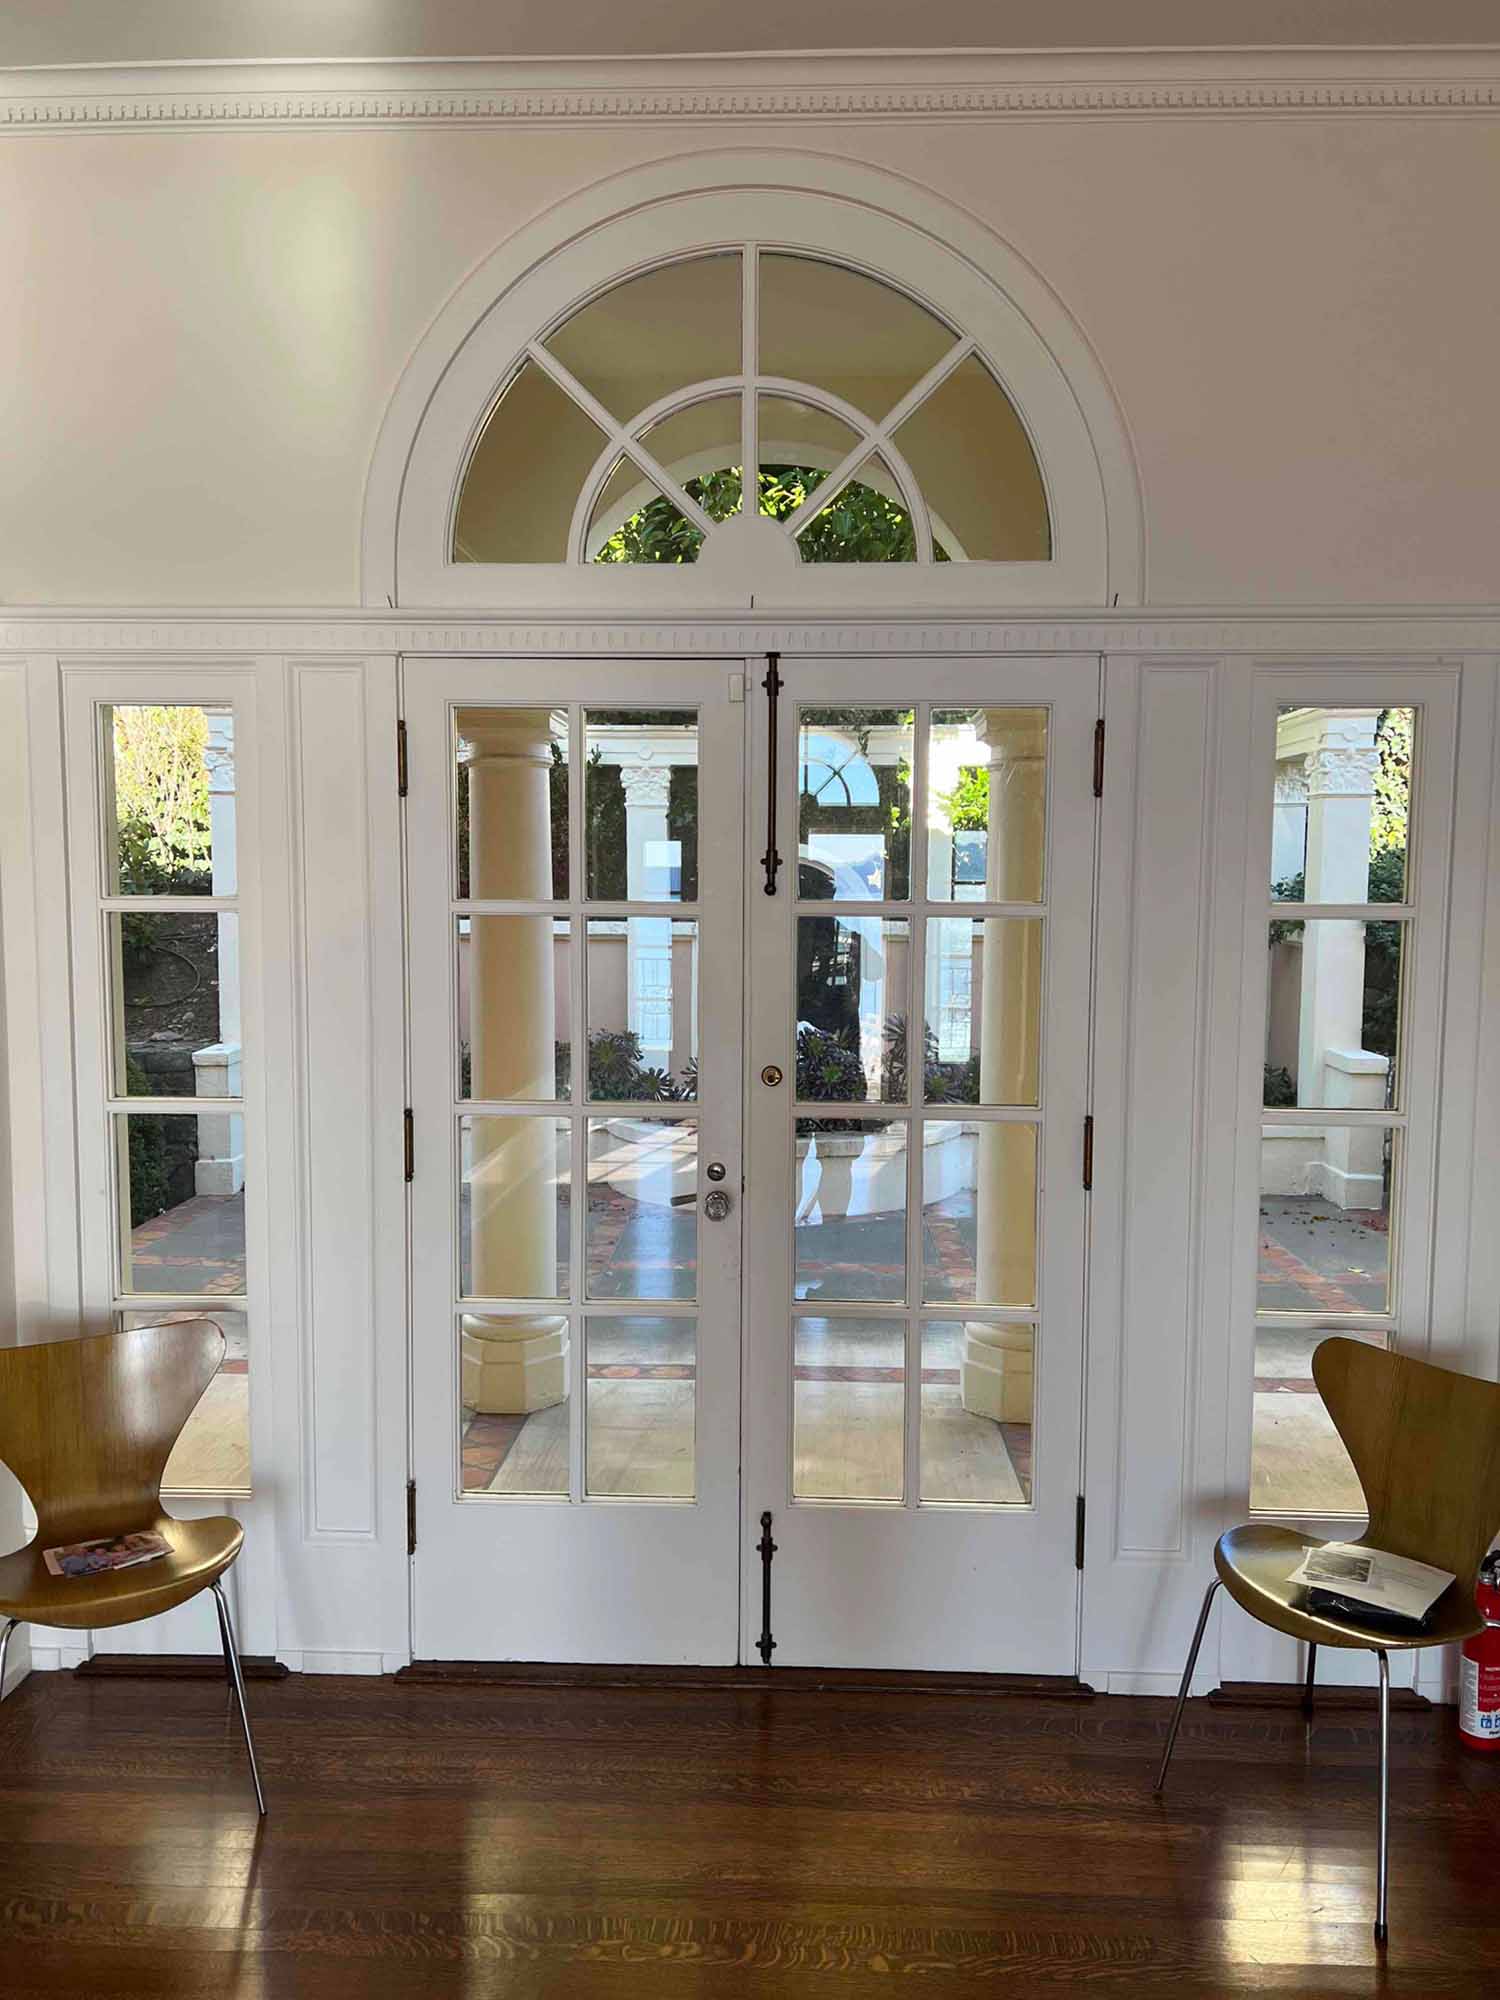 How can you get Sun Control Window Film for Your Belvedere, CA Home? Call ClimatePro for a free estimate today.